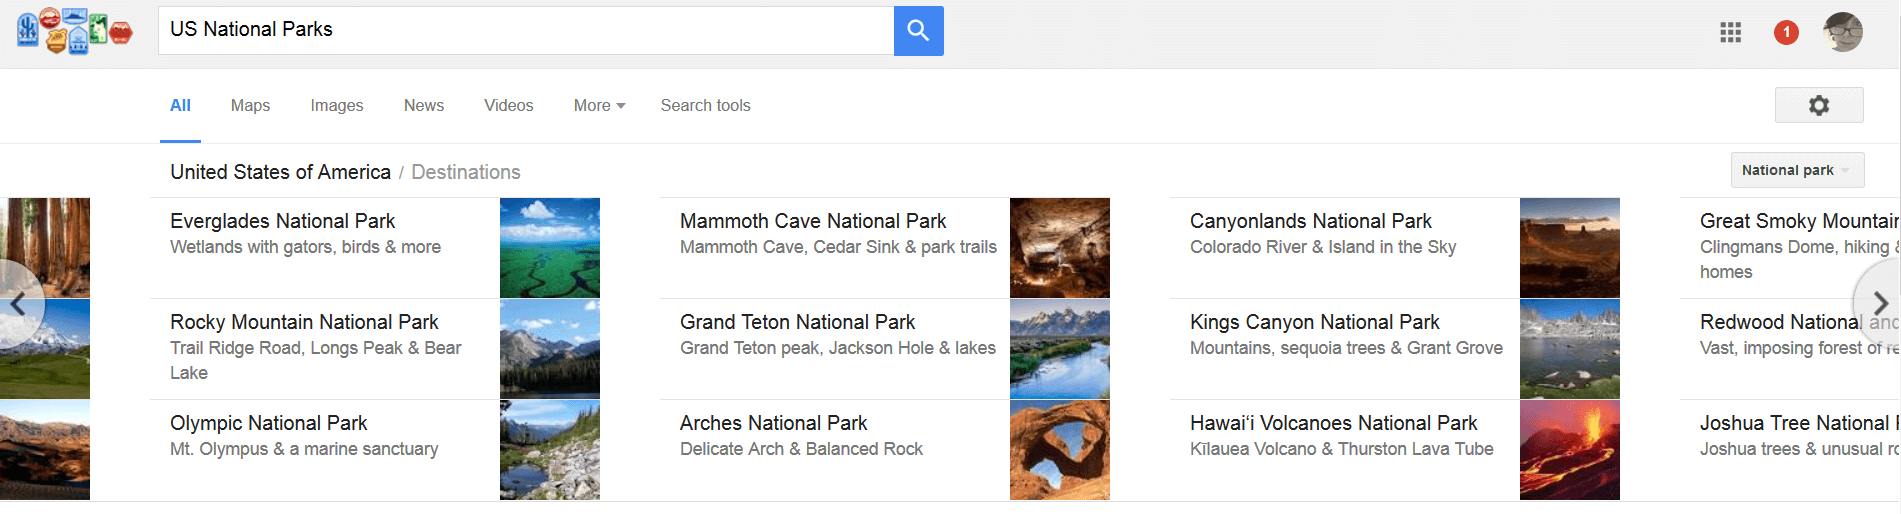 US national parks search